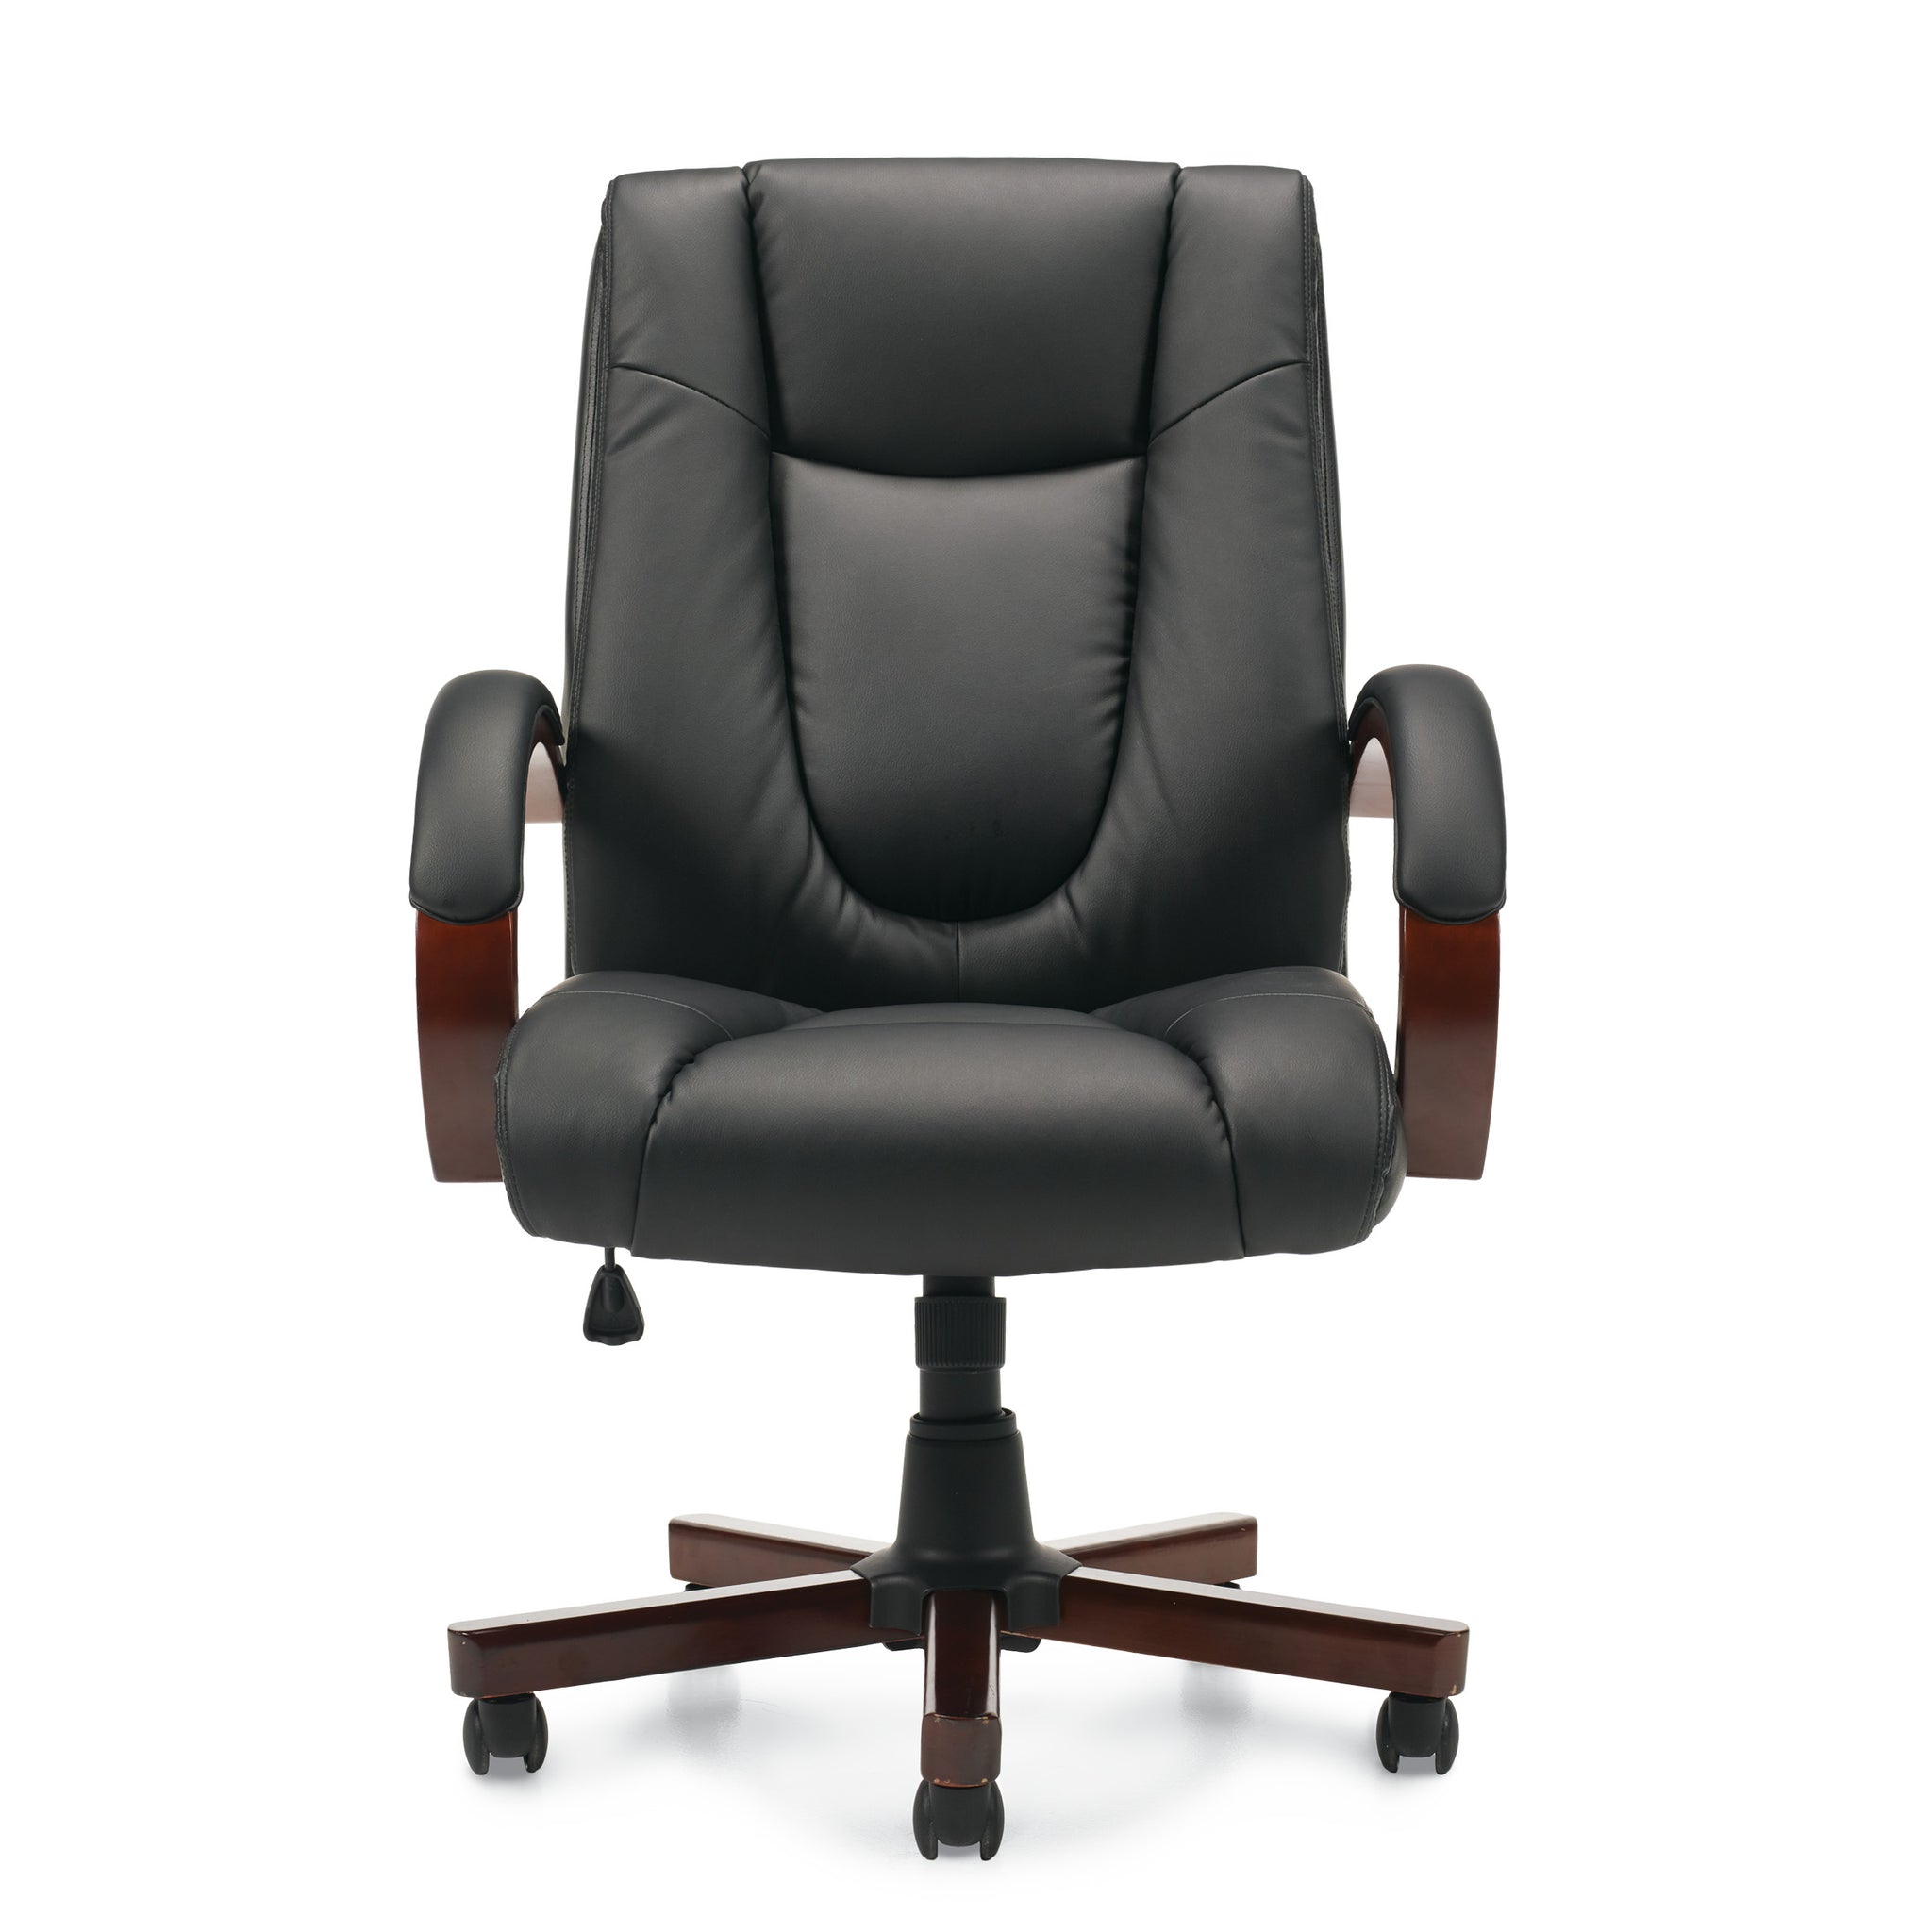 11300B Luxhide Tilter Chair w/ Wood Arms and Base